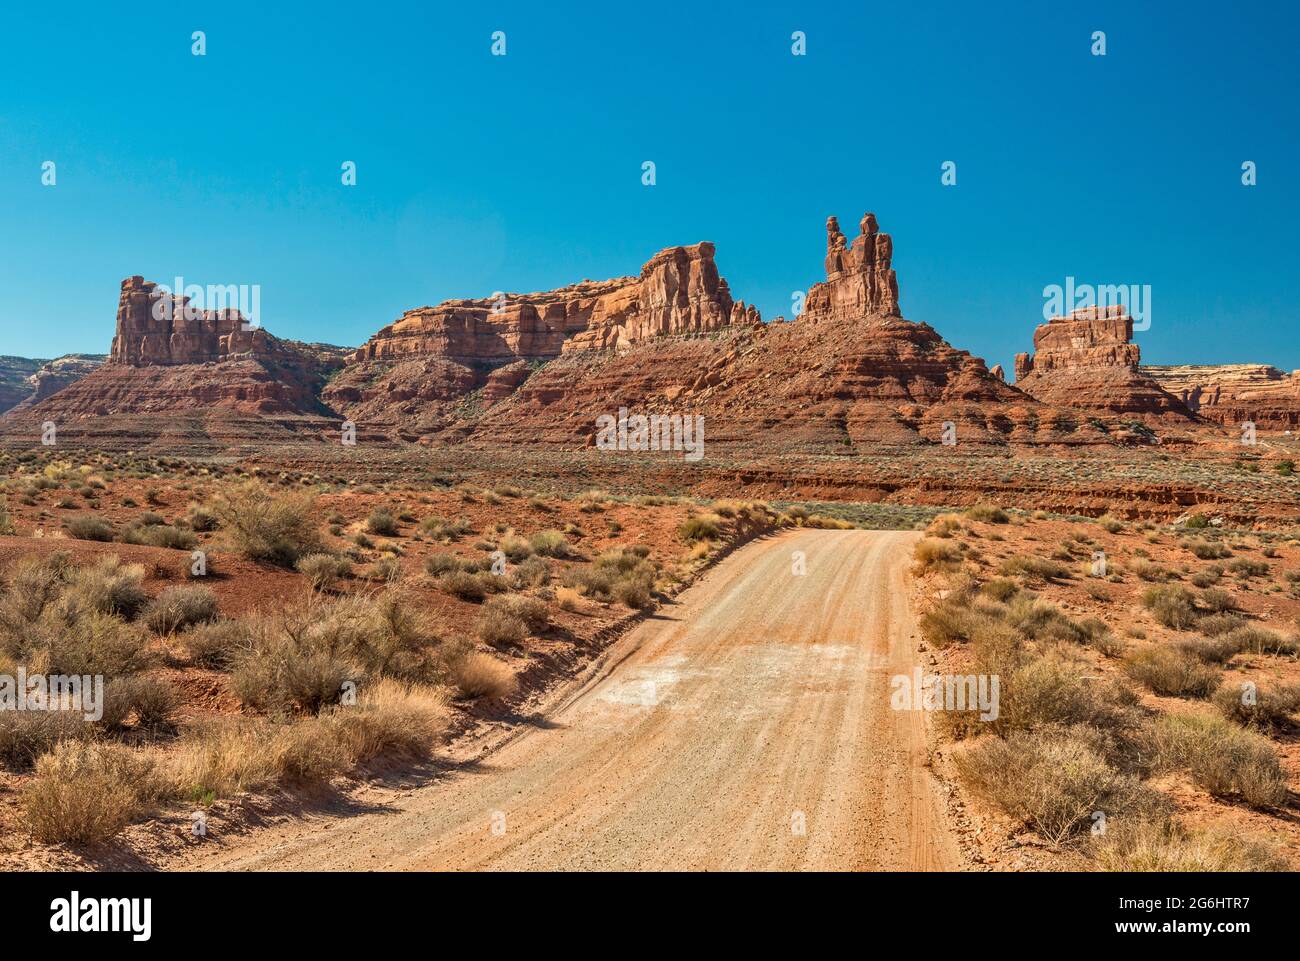 Sandstone towers in Valley of the Gods, Bears Ears National Monument (2016-2017), Utah, USA Stock Photo